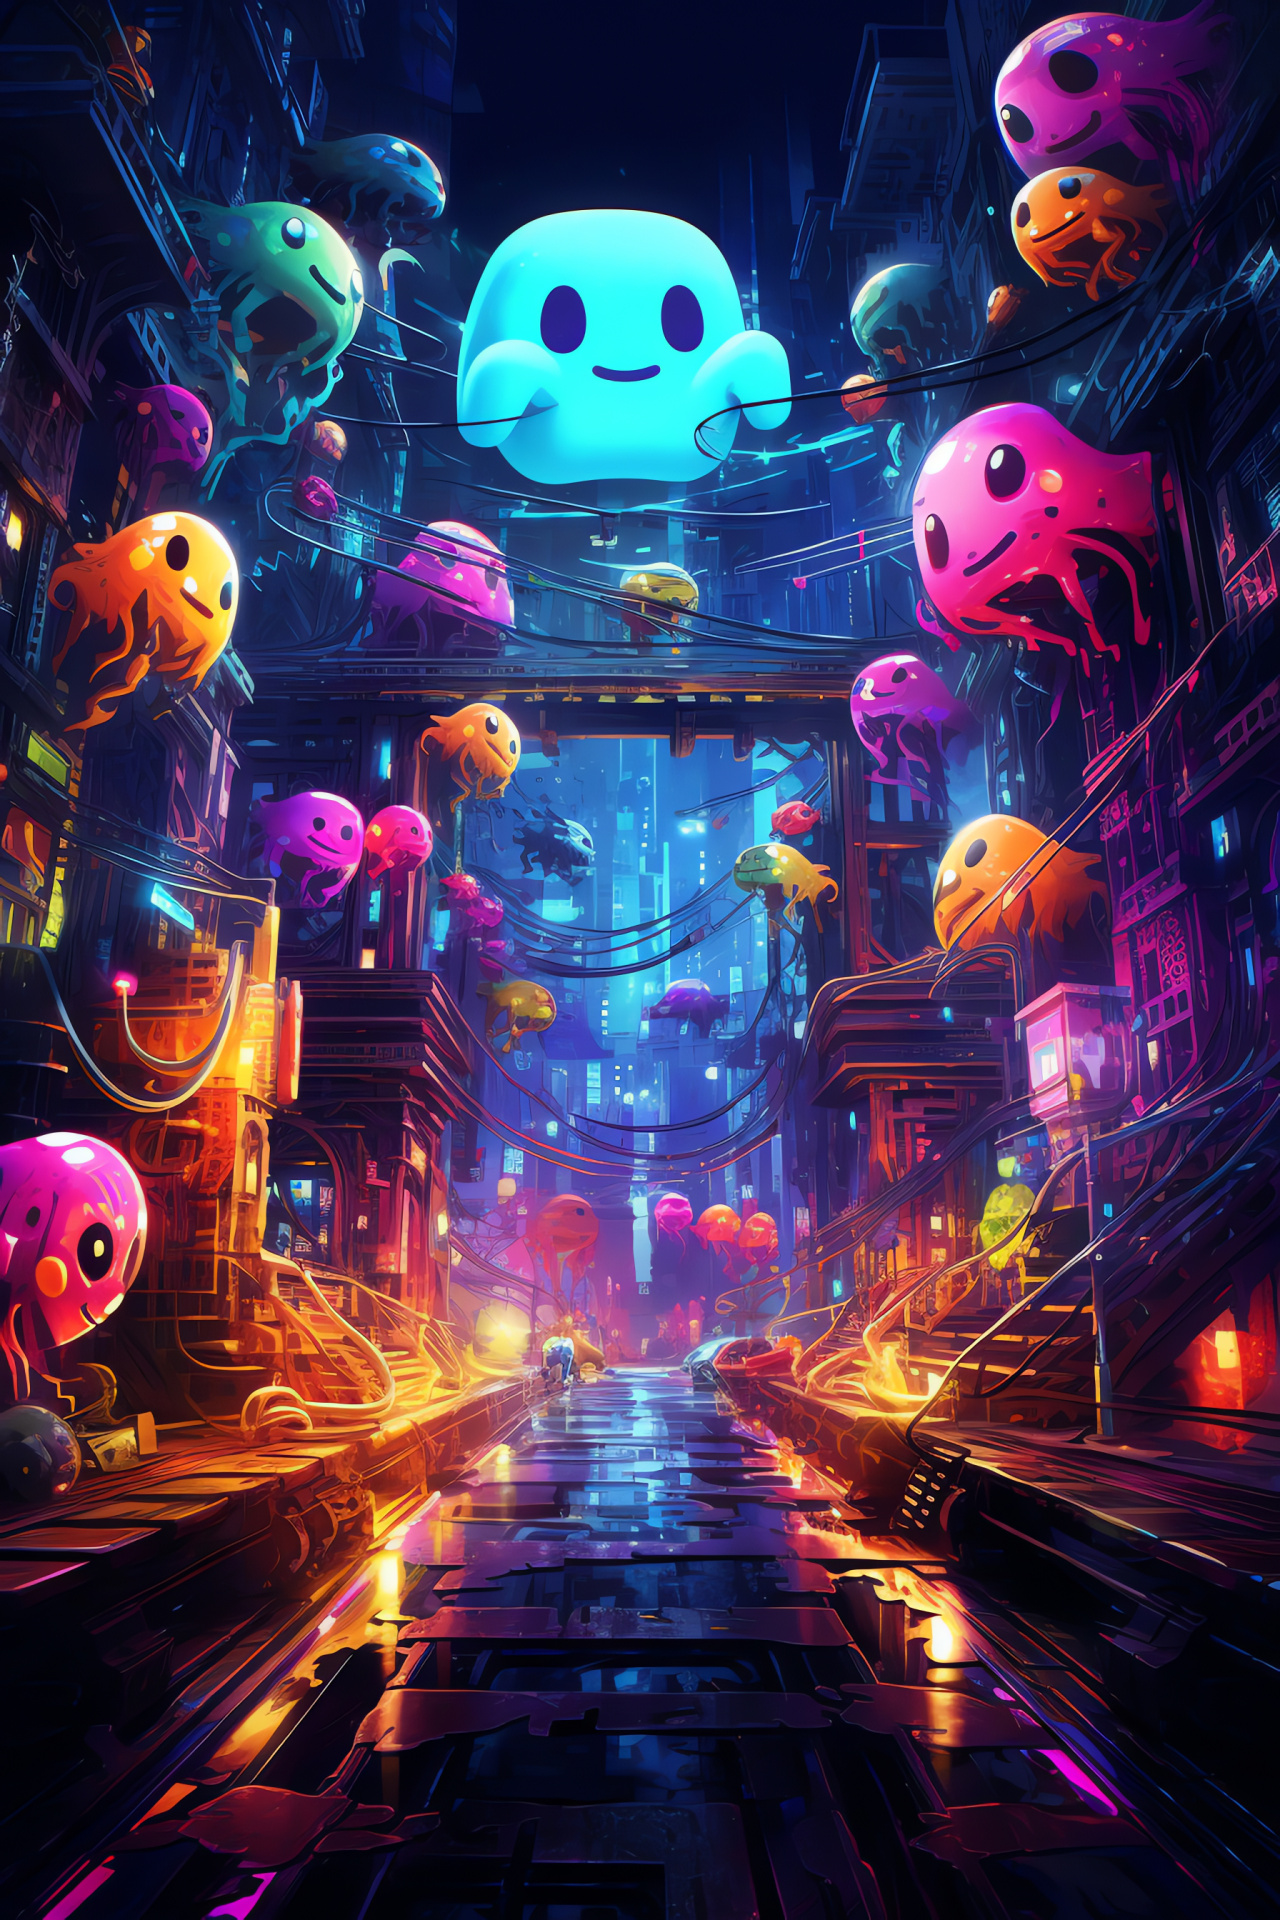 Pacman game, Cyberspace labyrinth, Ghost pursuits, Digital world, Arcade evolution, HD Phone Image